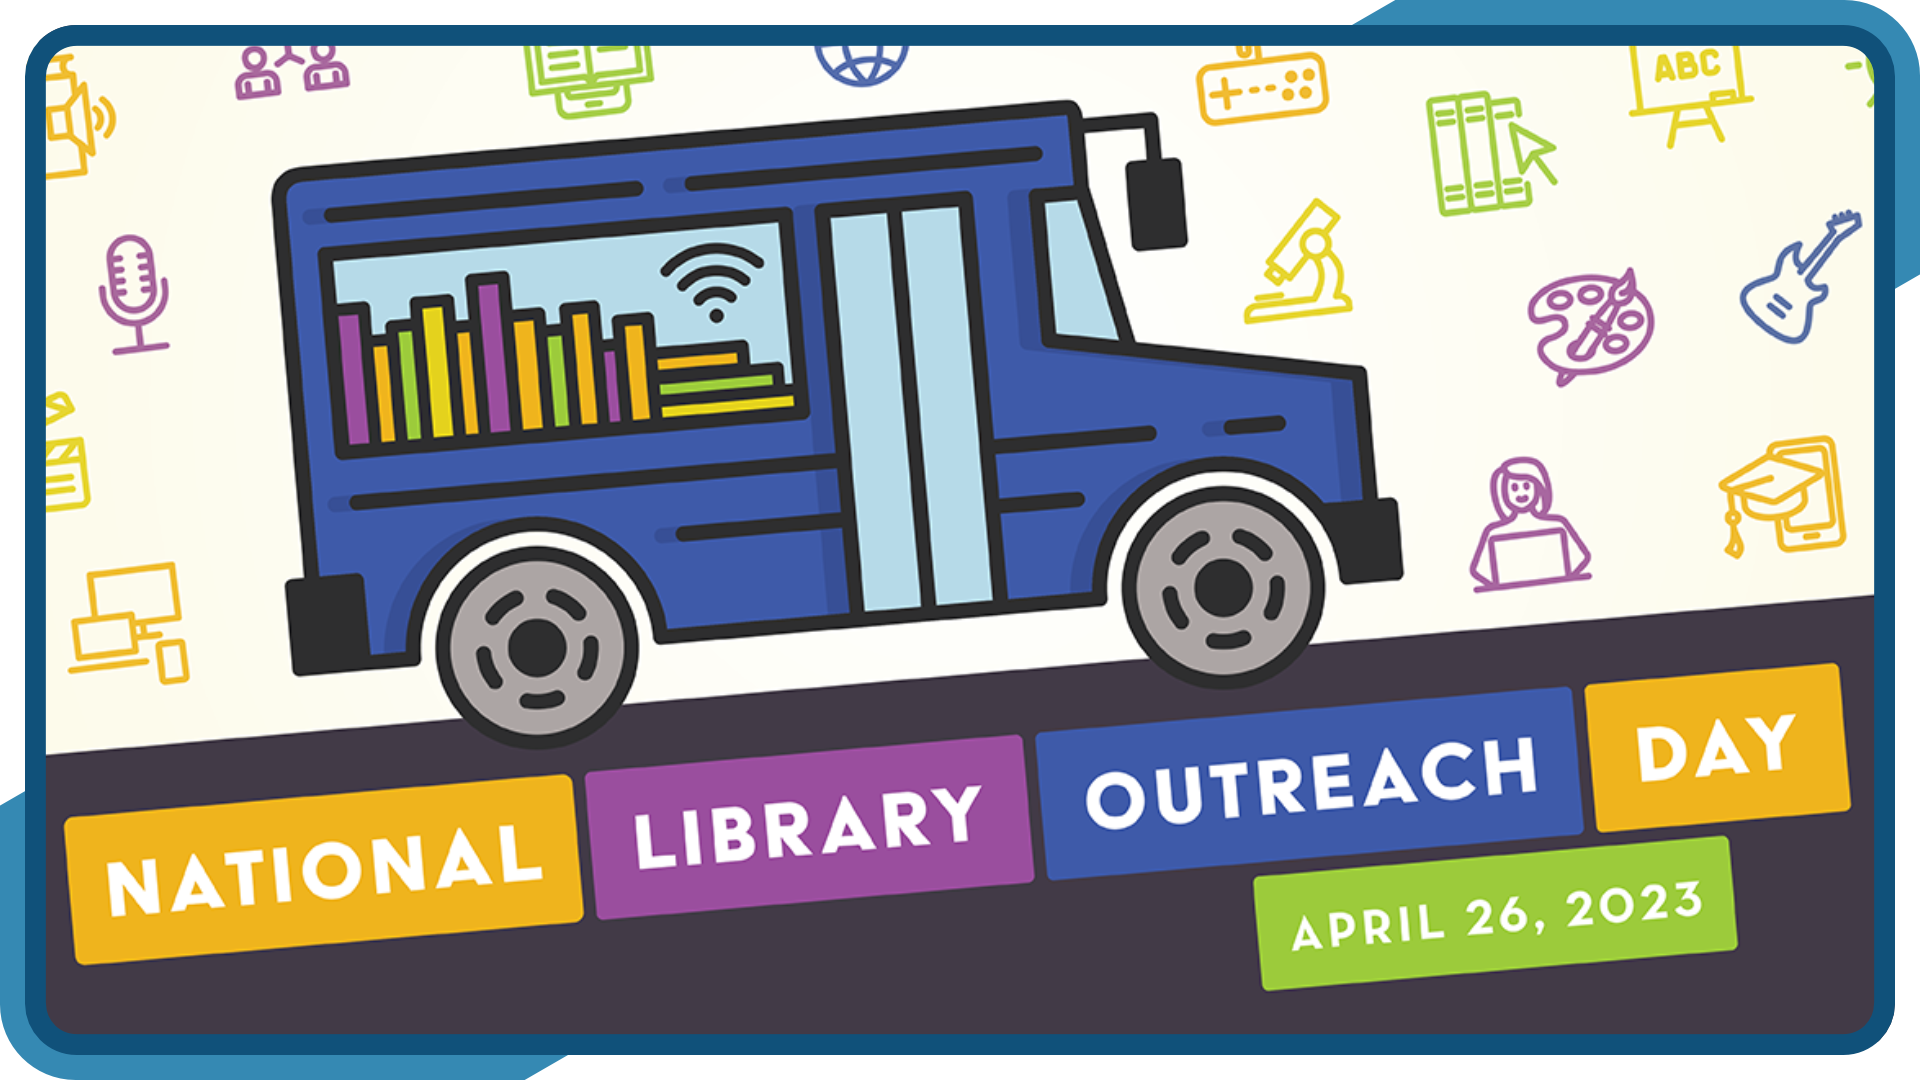 National Library Outreach Day is April 26th